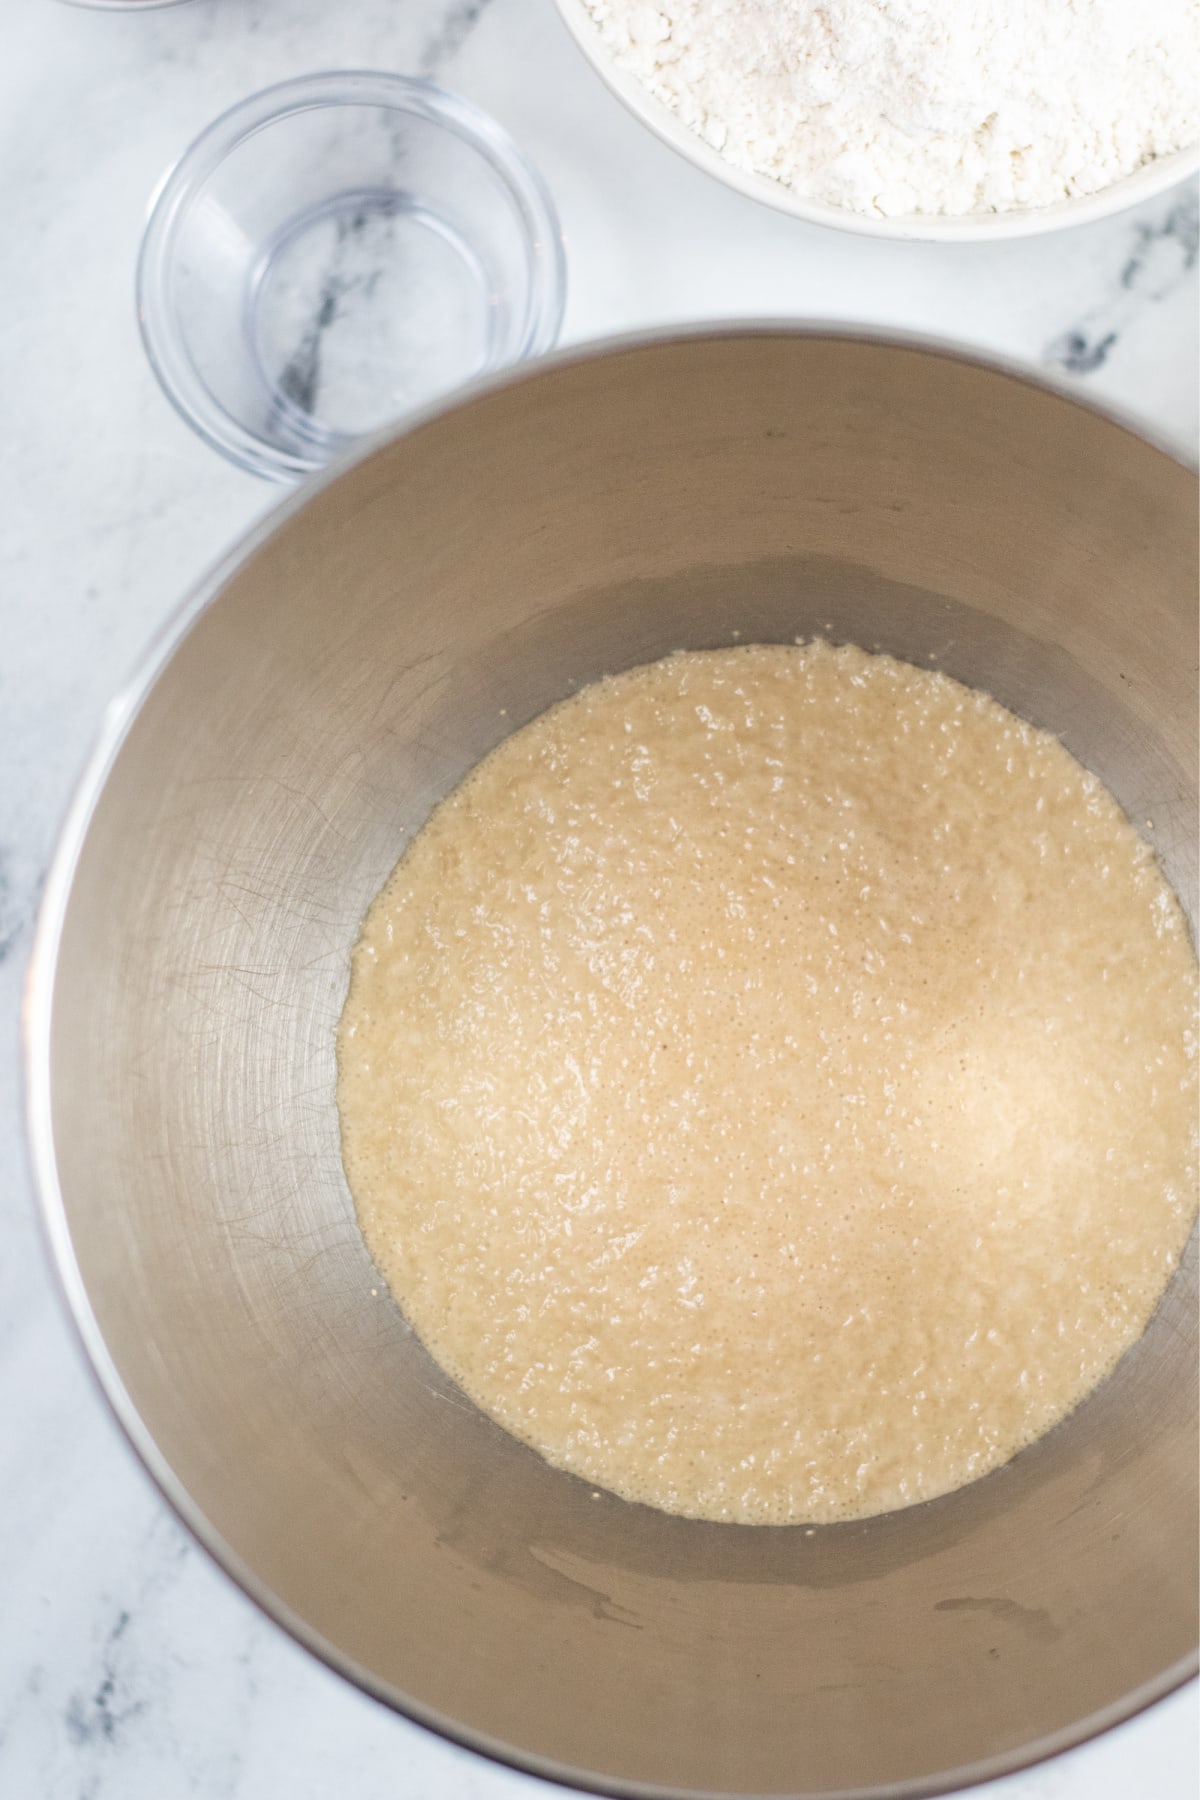 Yeast and water in bowl